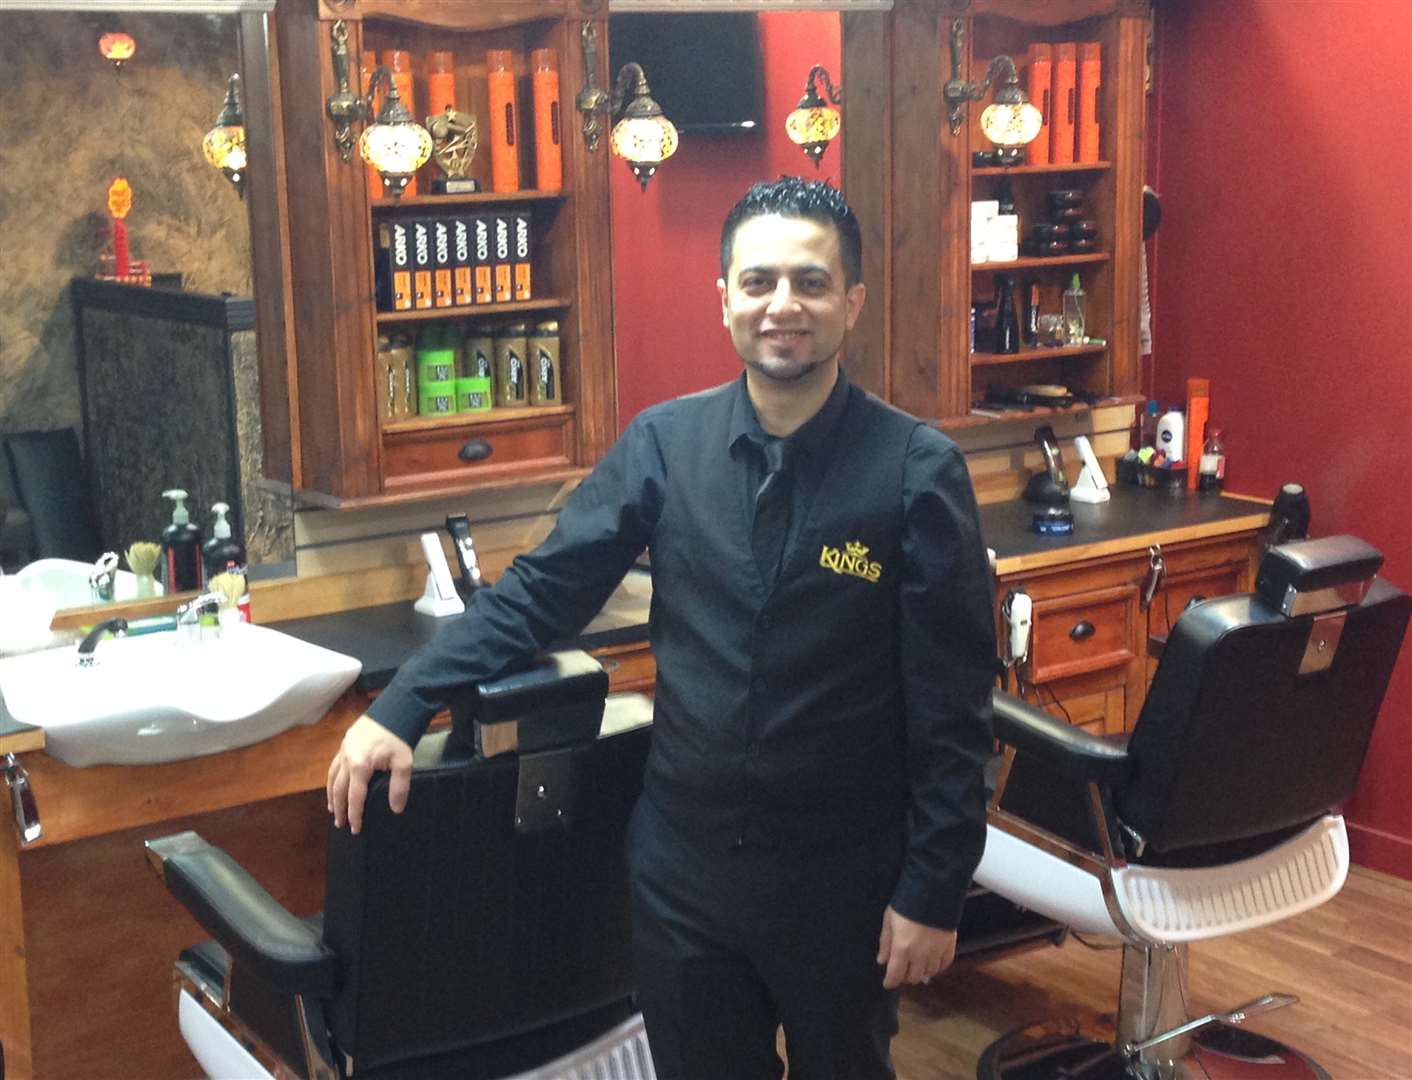 Enver (Efe) at King's Barbers in Deal High Street has been recognised for his wet shave skills